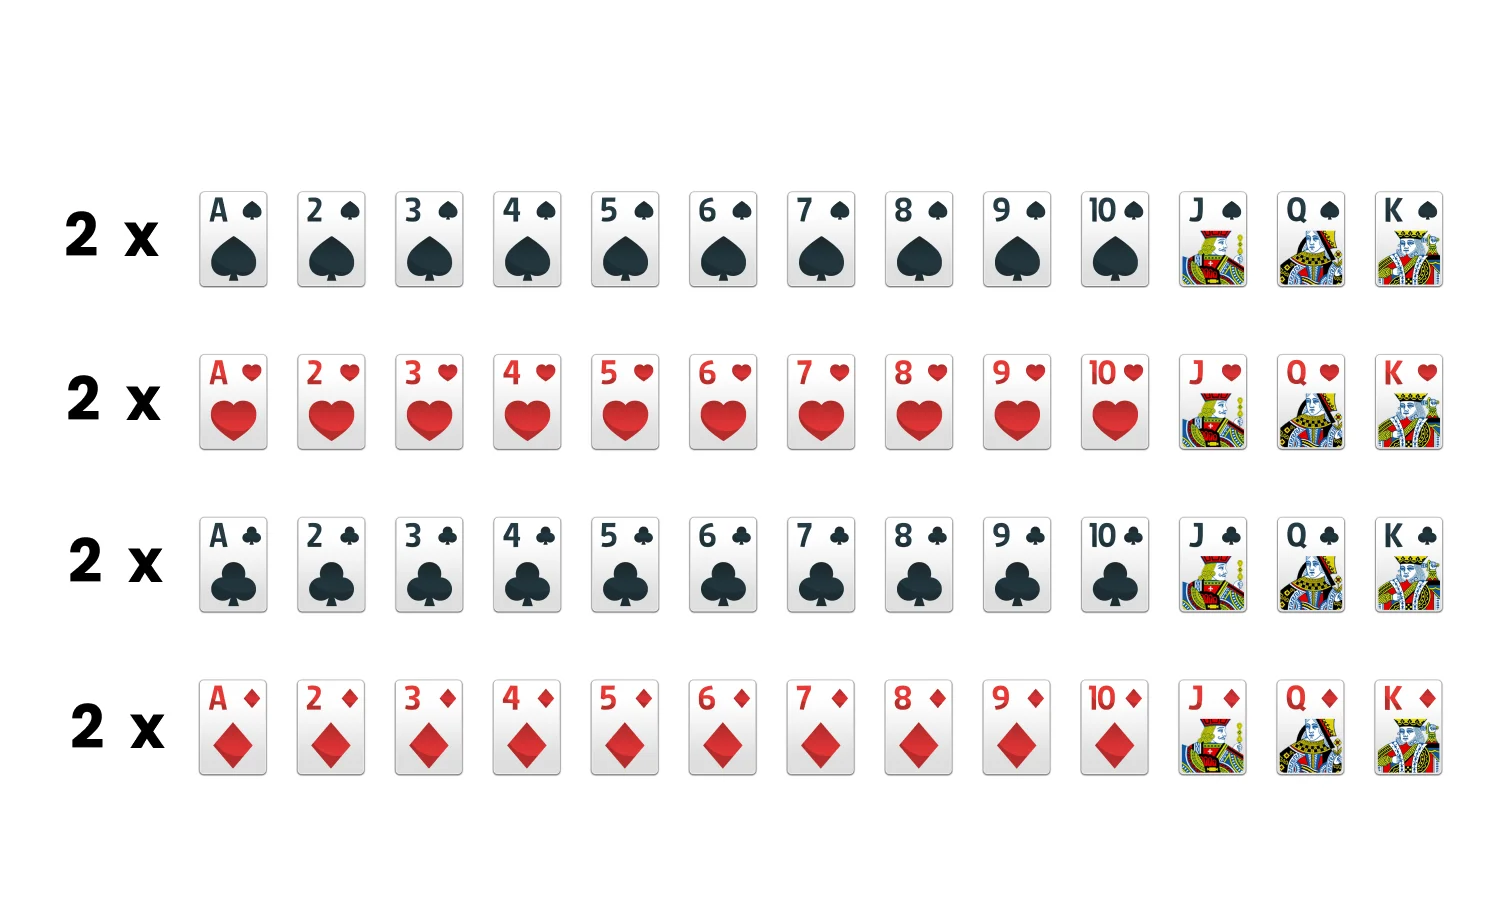 How to Set Up Spider Solitaire: 4 suit